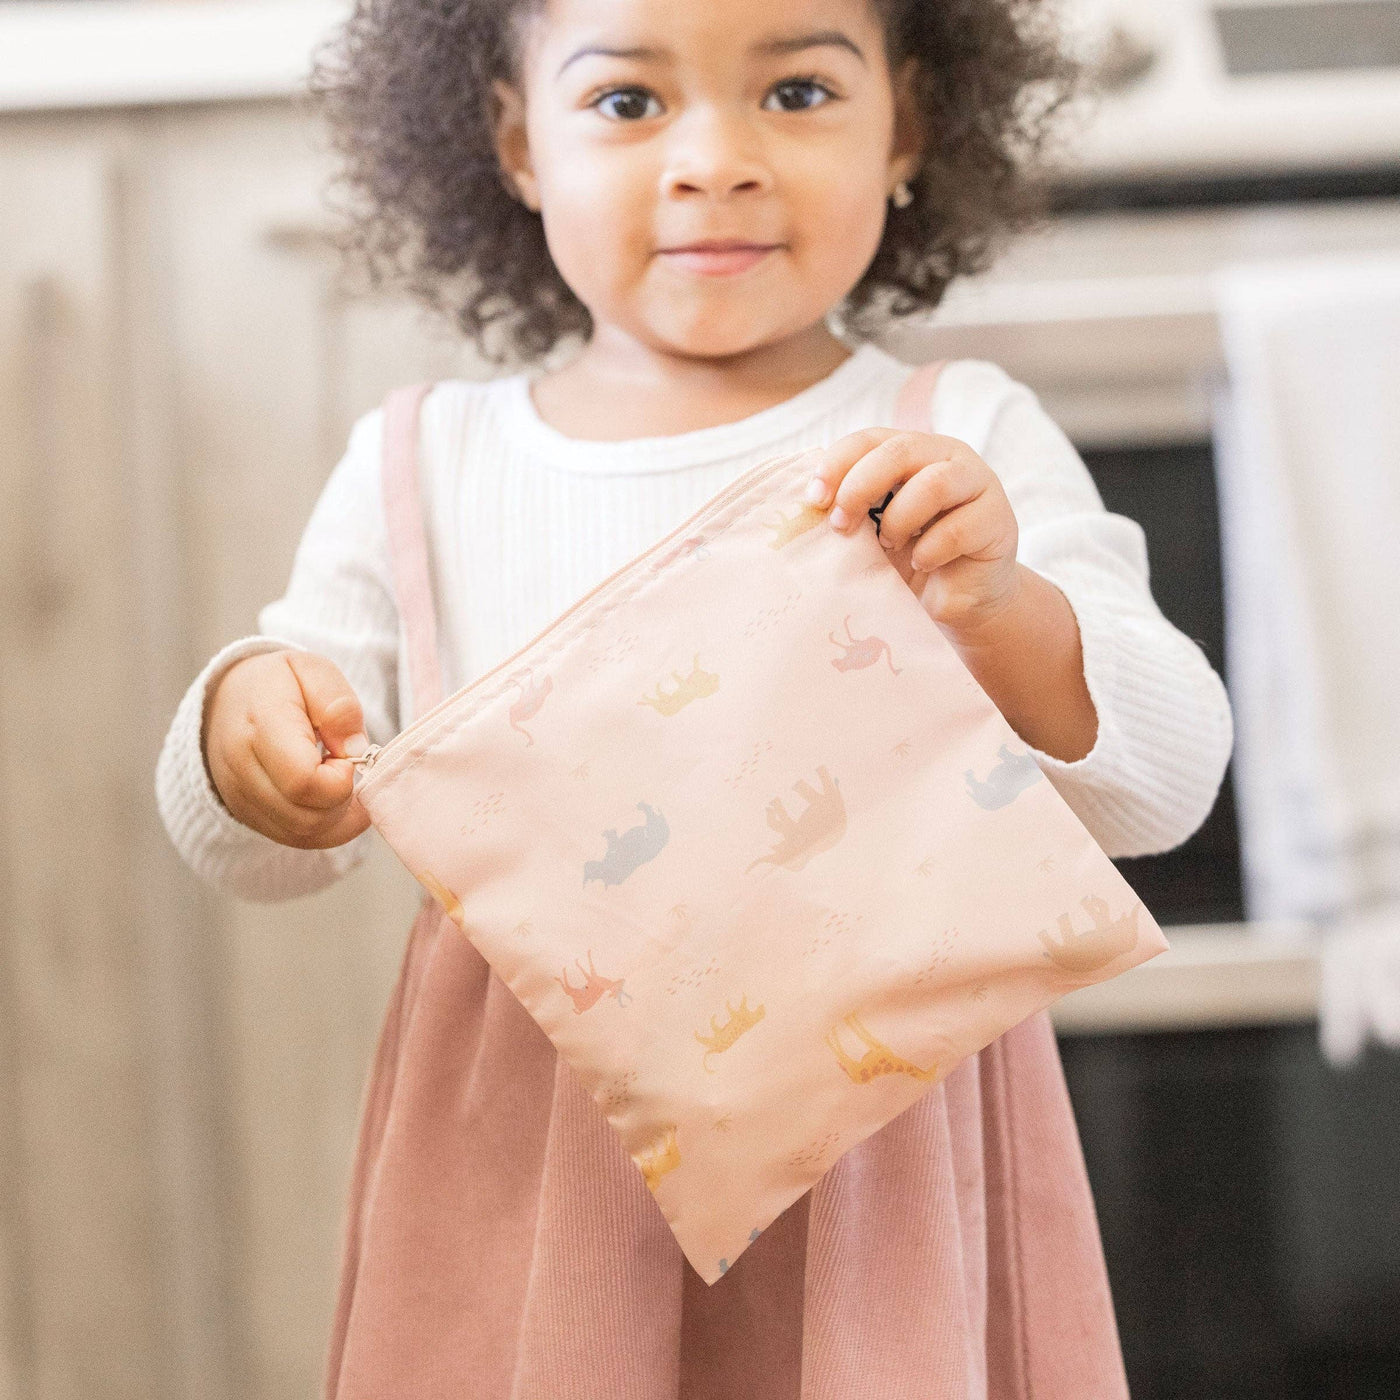 Tiny Twinkle Reusable Snack Bags 5 Pack - Simple Good